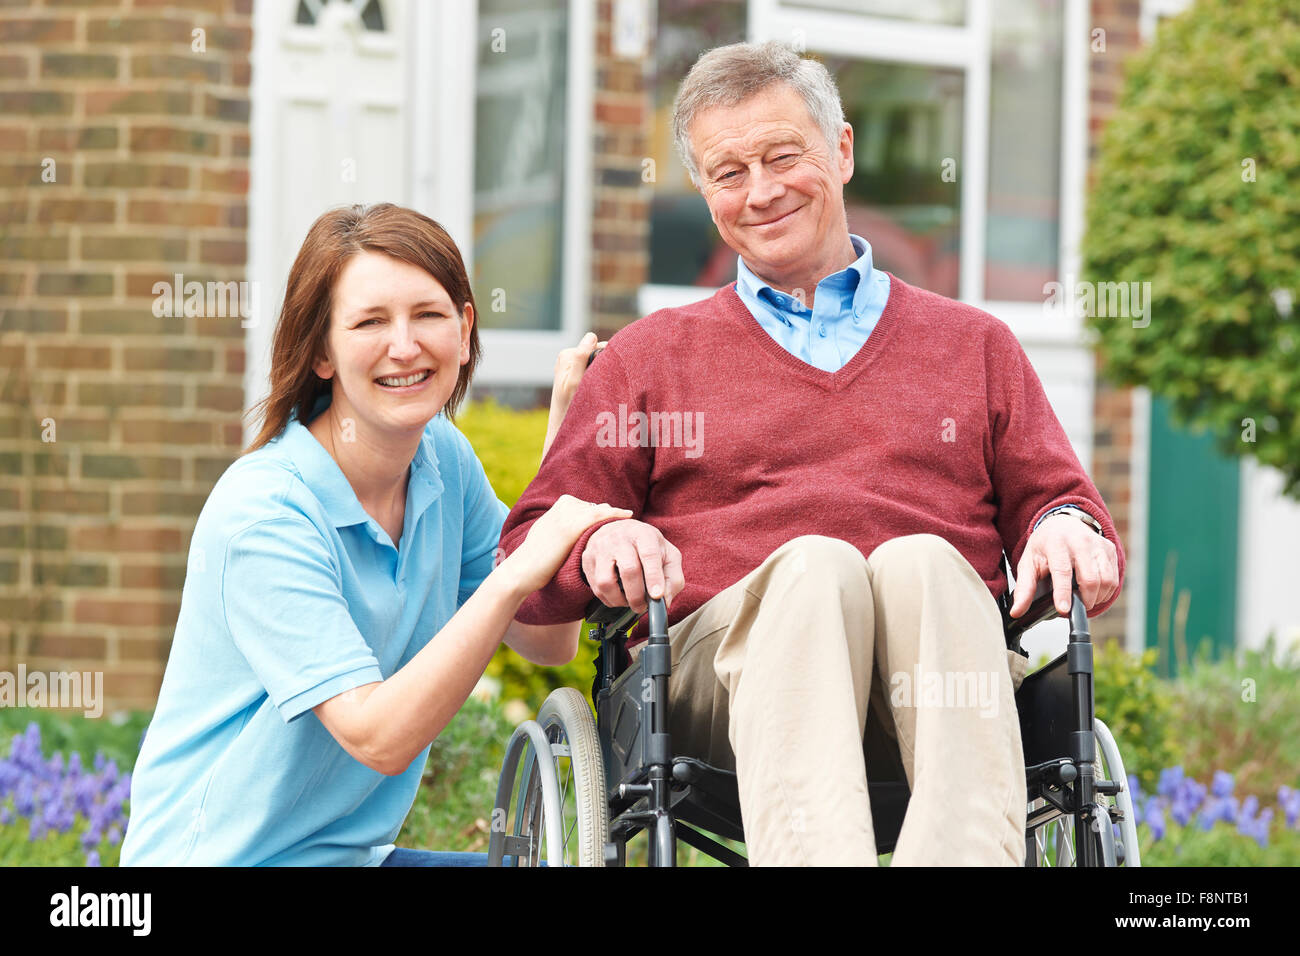 Carer With Senior Man In Wheelchair Stock Photo